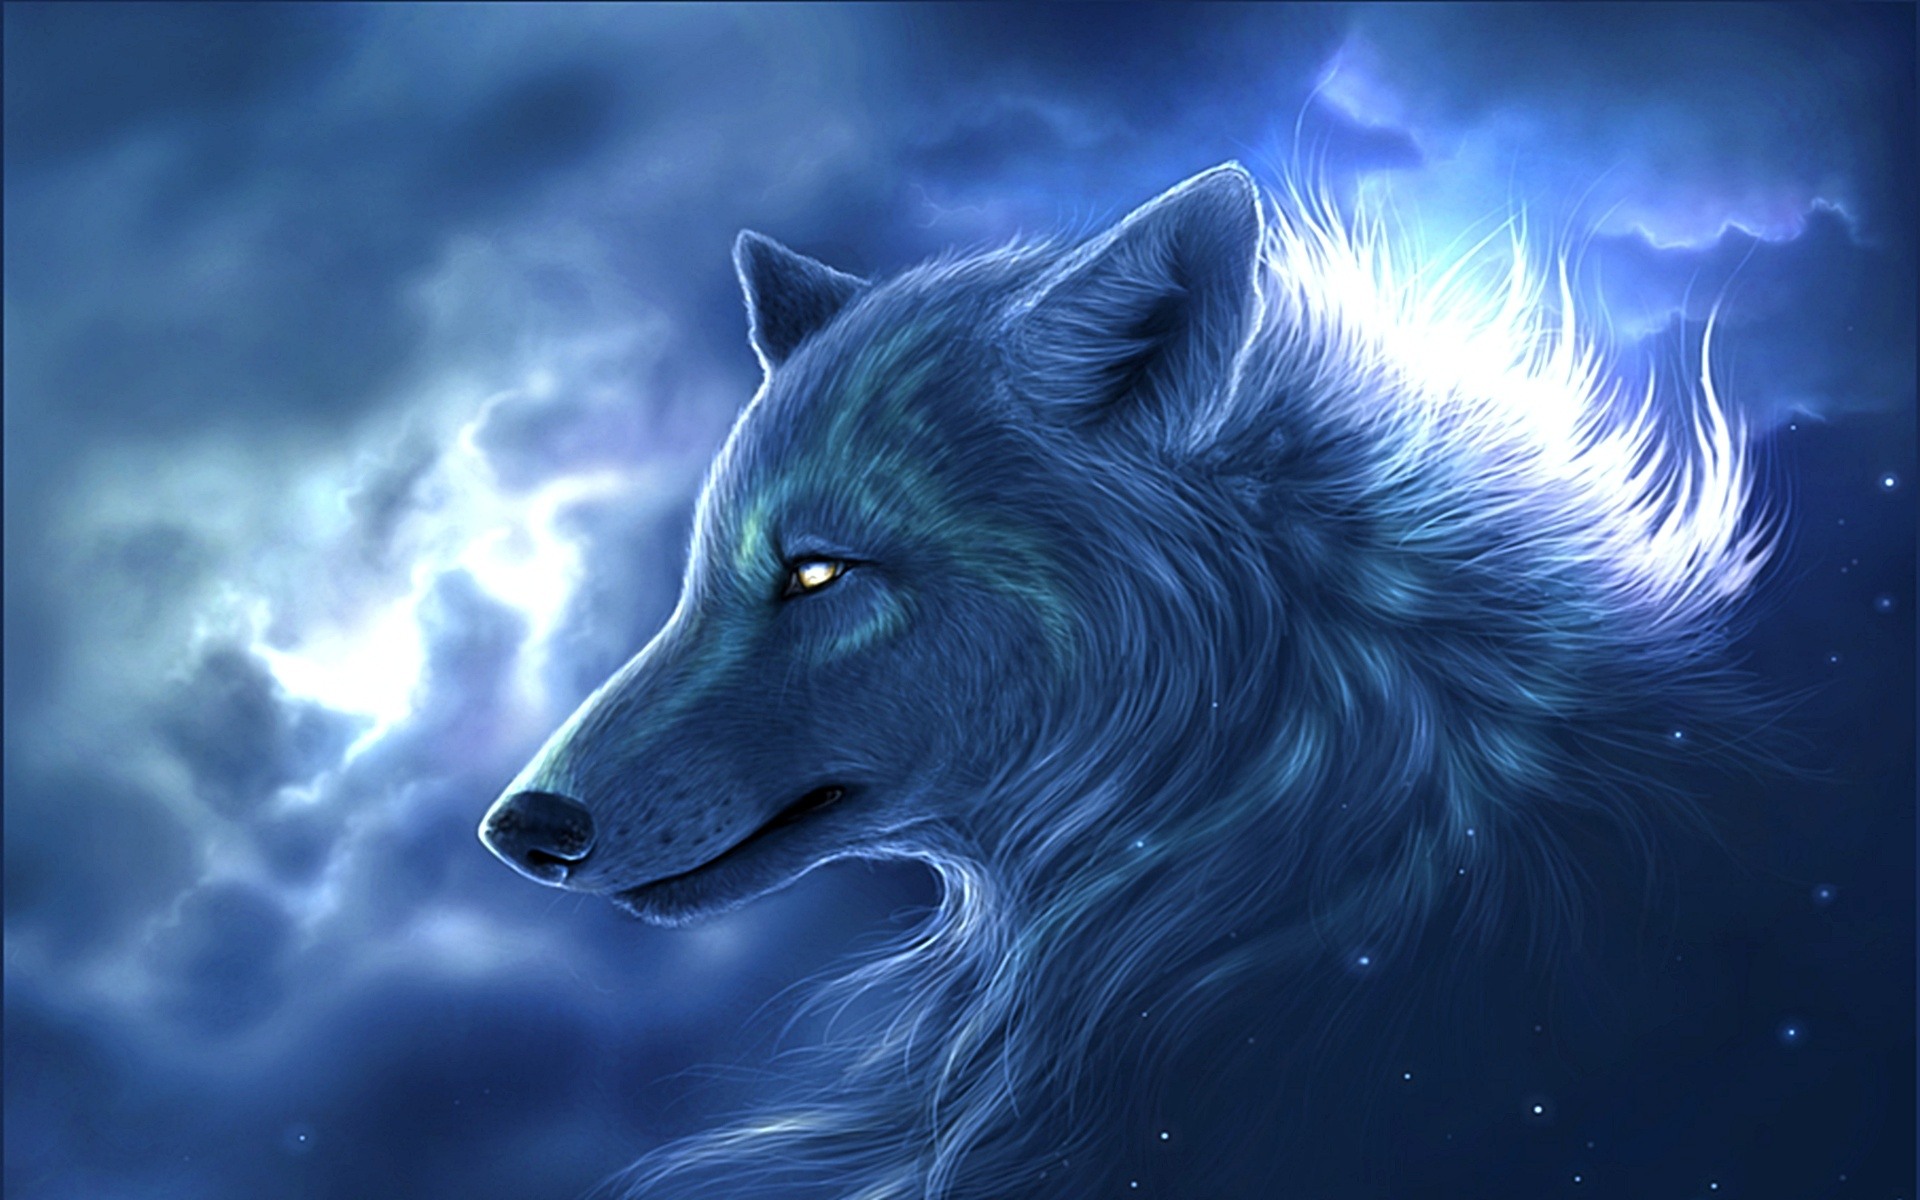 49 Free Wolf Wallpapers For Laptops On Wallpapersafari All of the wolf wallpapers bellow have a minimum hd resolution (or 1920x1080 for the tech guys) and are easily downloadable by clicking the image and saving it. 49 free wolf wallpapers for laptops